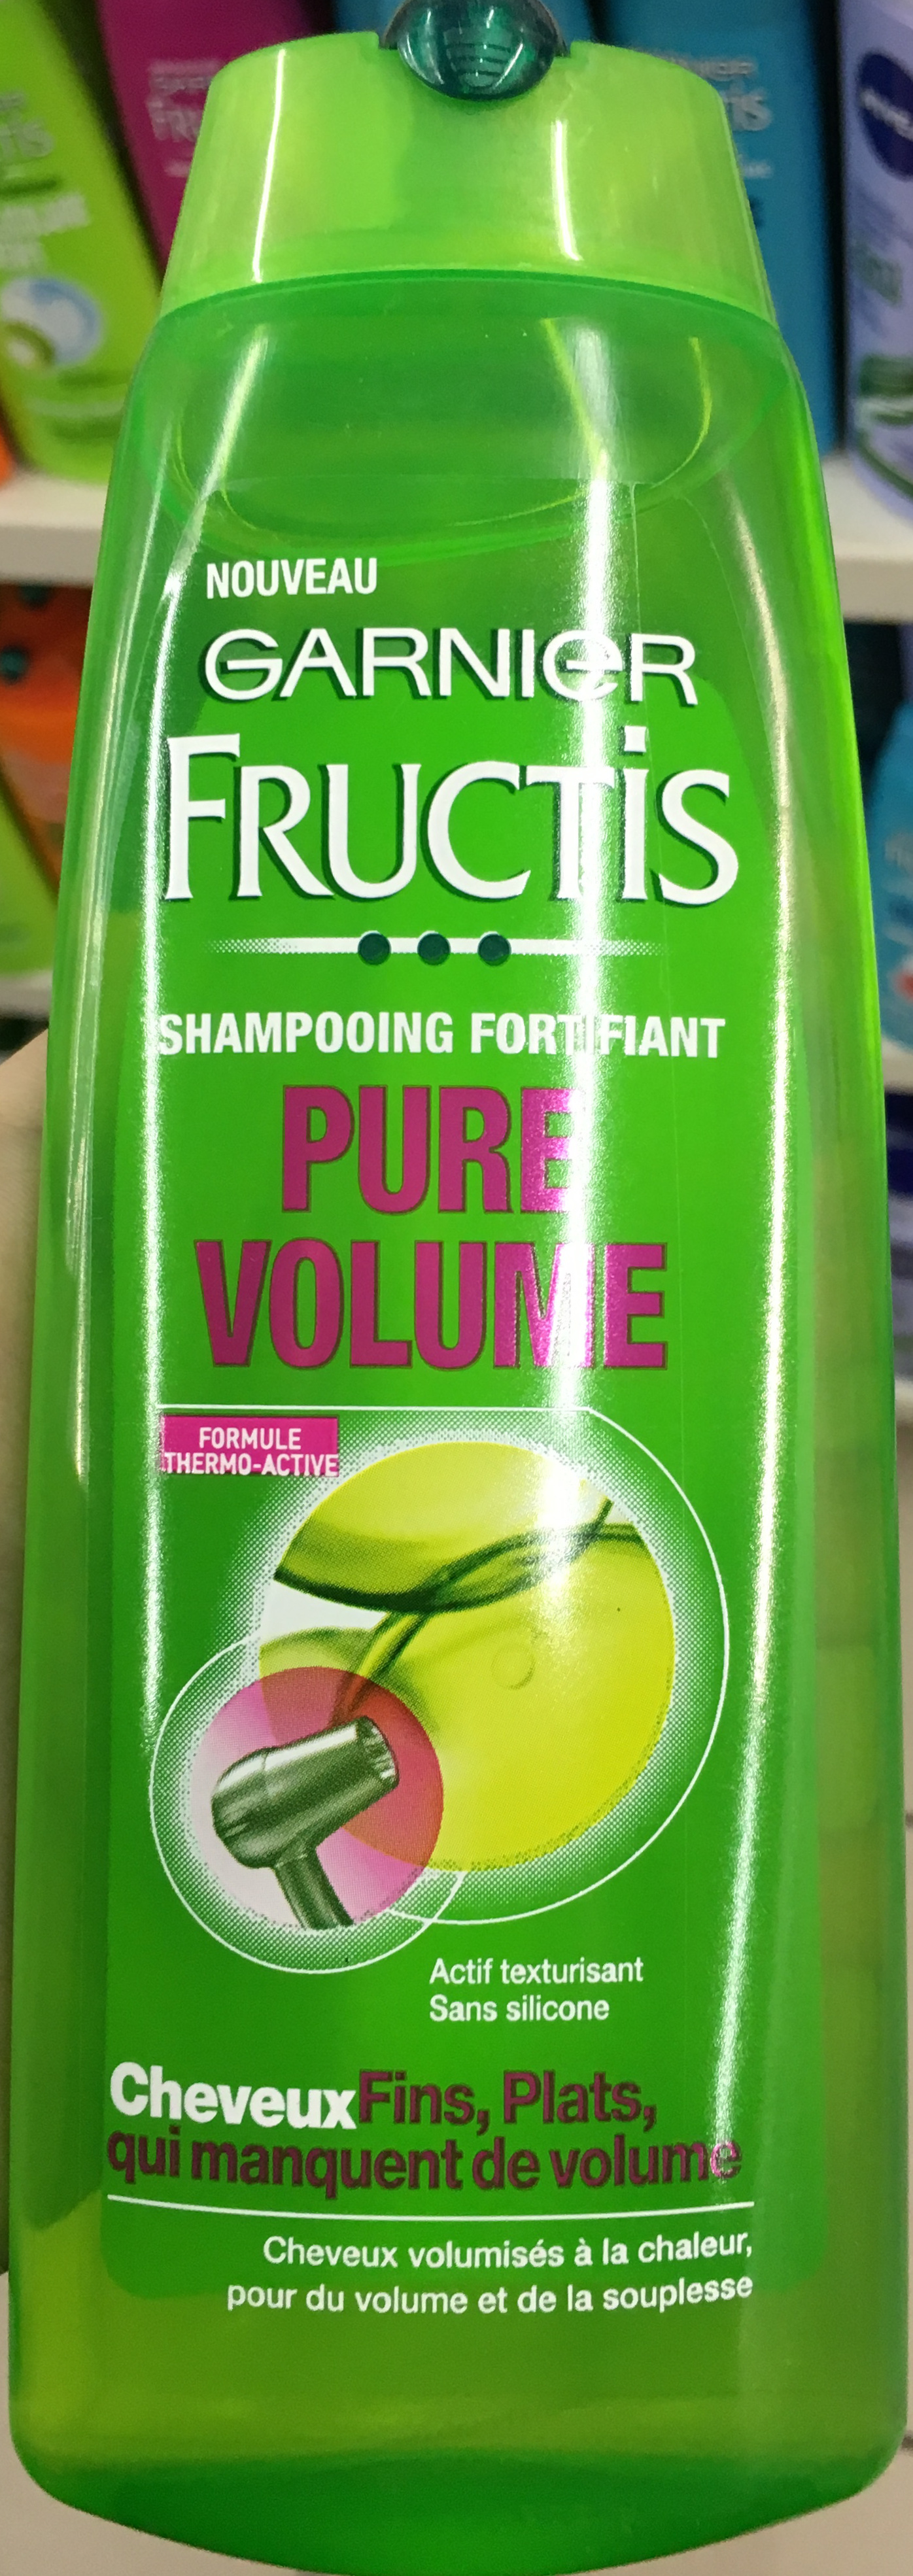 Fructis Shampooing fortifiant Pure Volume - Product - fr